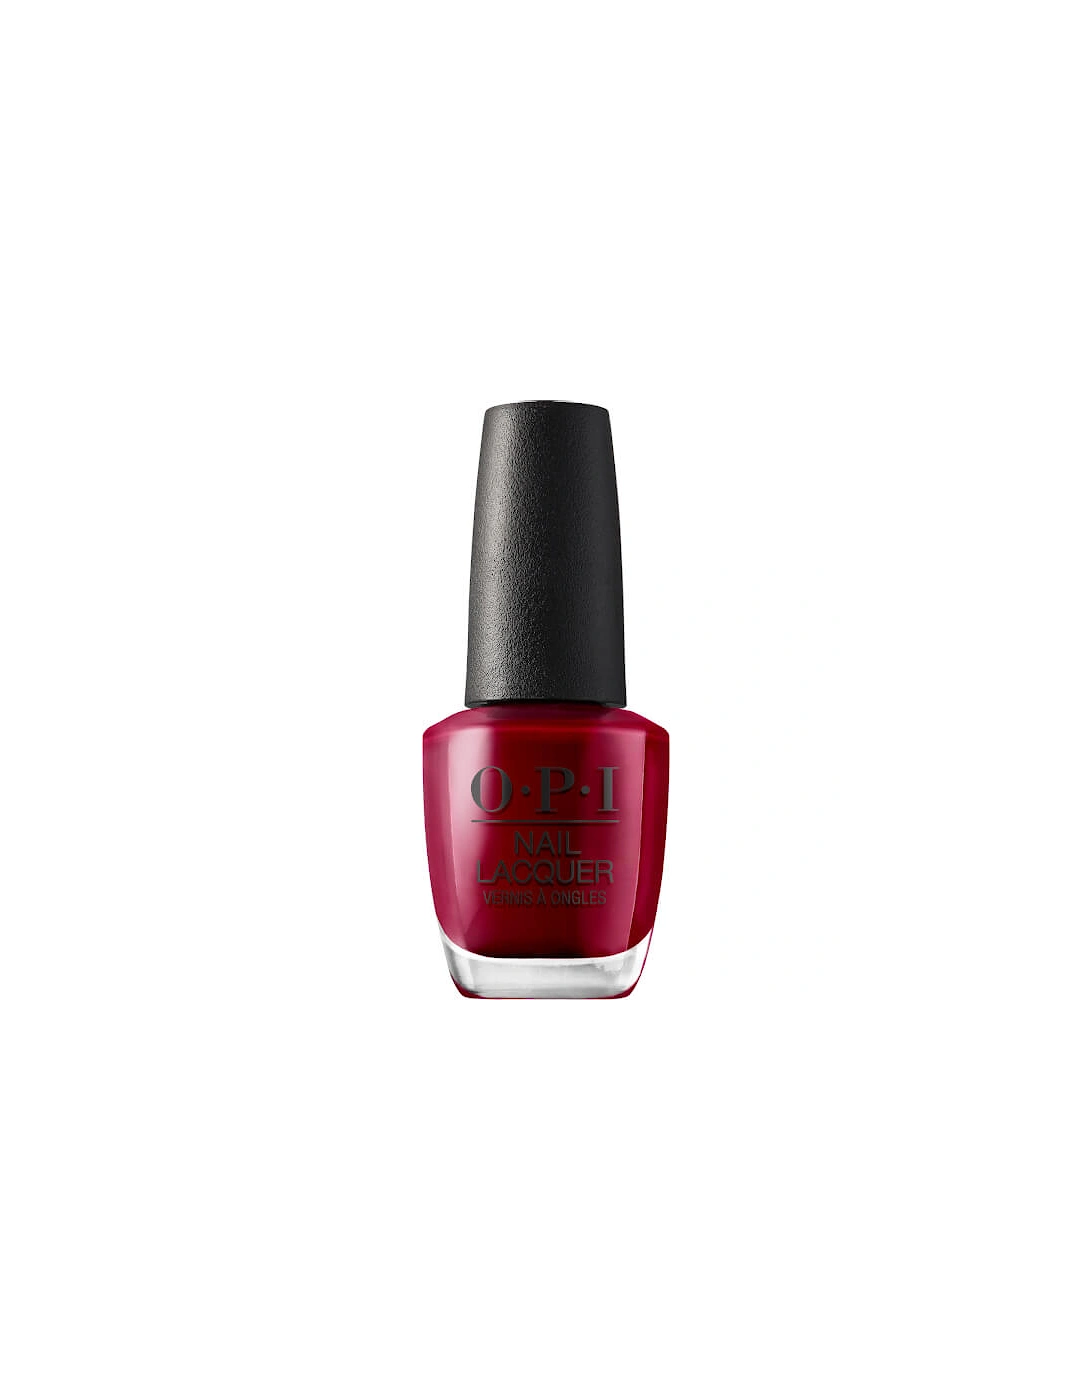 Nail Polish - You're Such a Budapst 15ml, 2 of 1